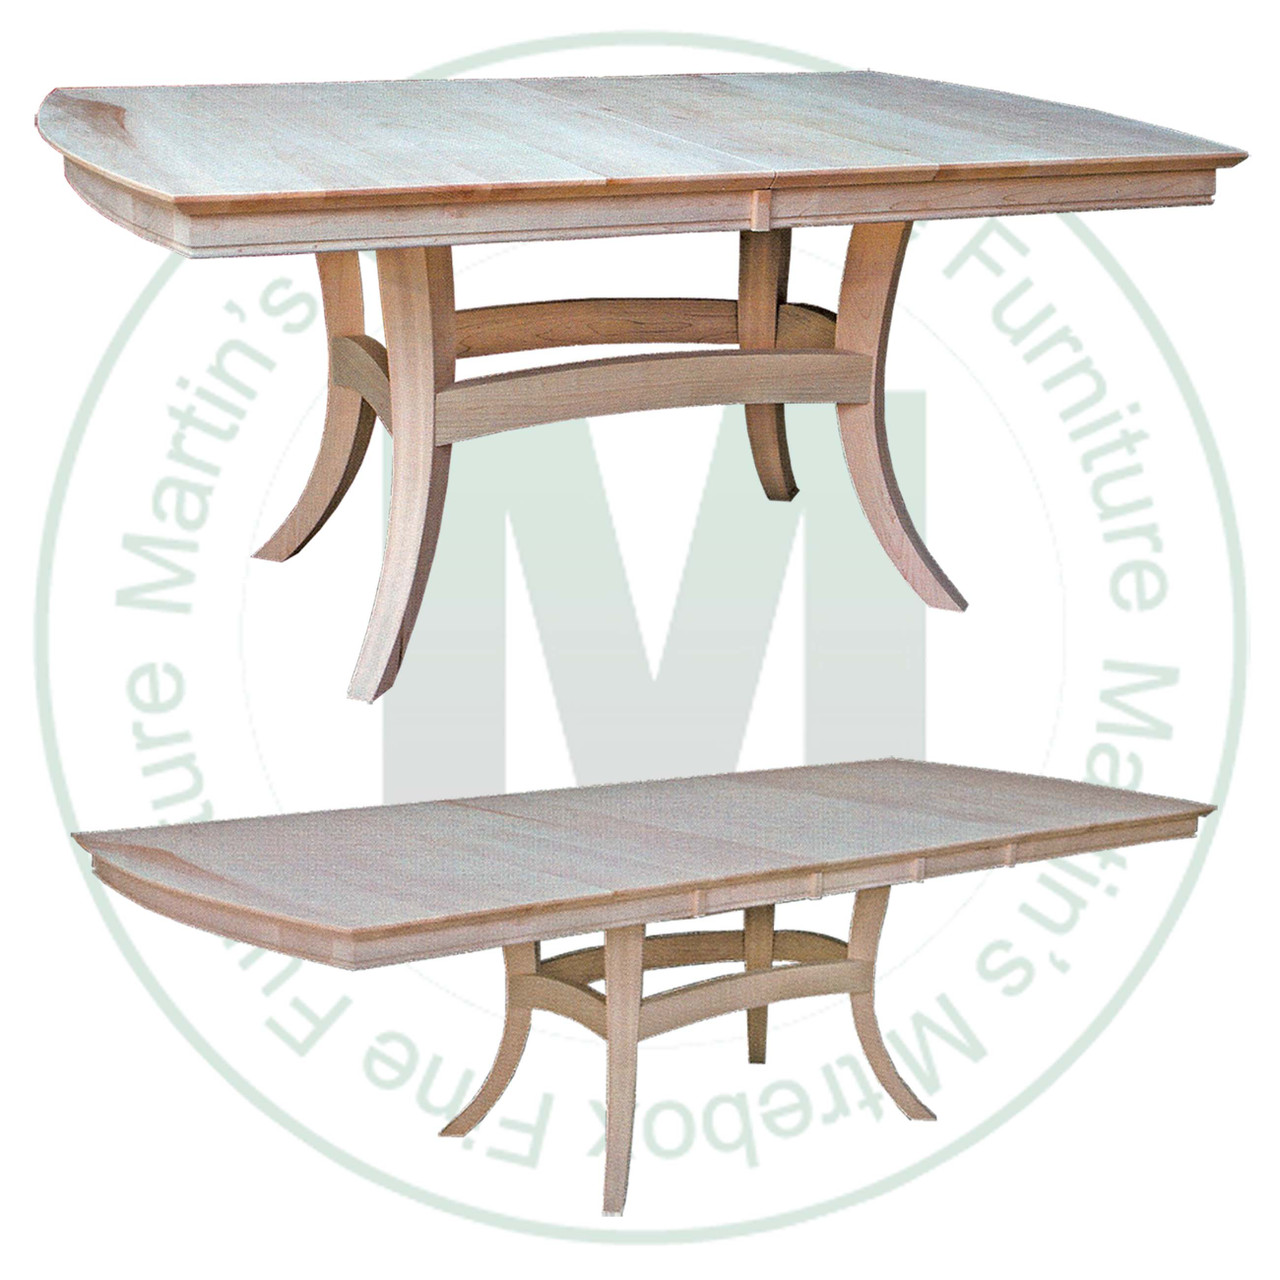 Maple Tokyo Double Pedestal Table 54''D x 72''W x 30''H With 4 - 12'' Leaves